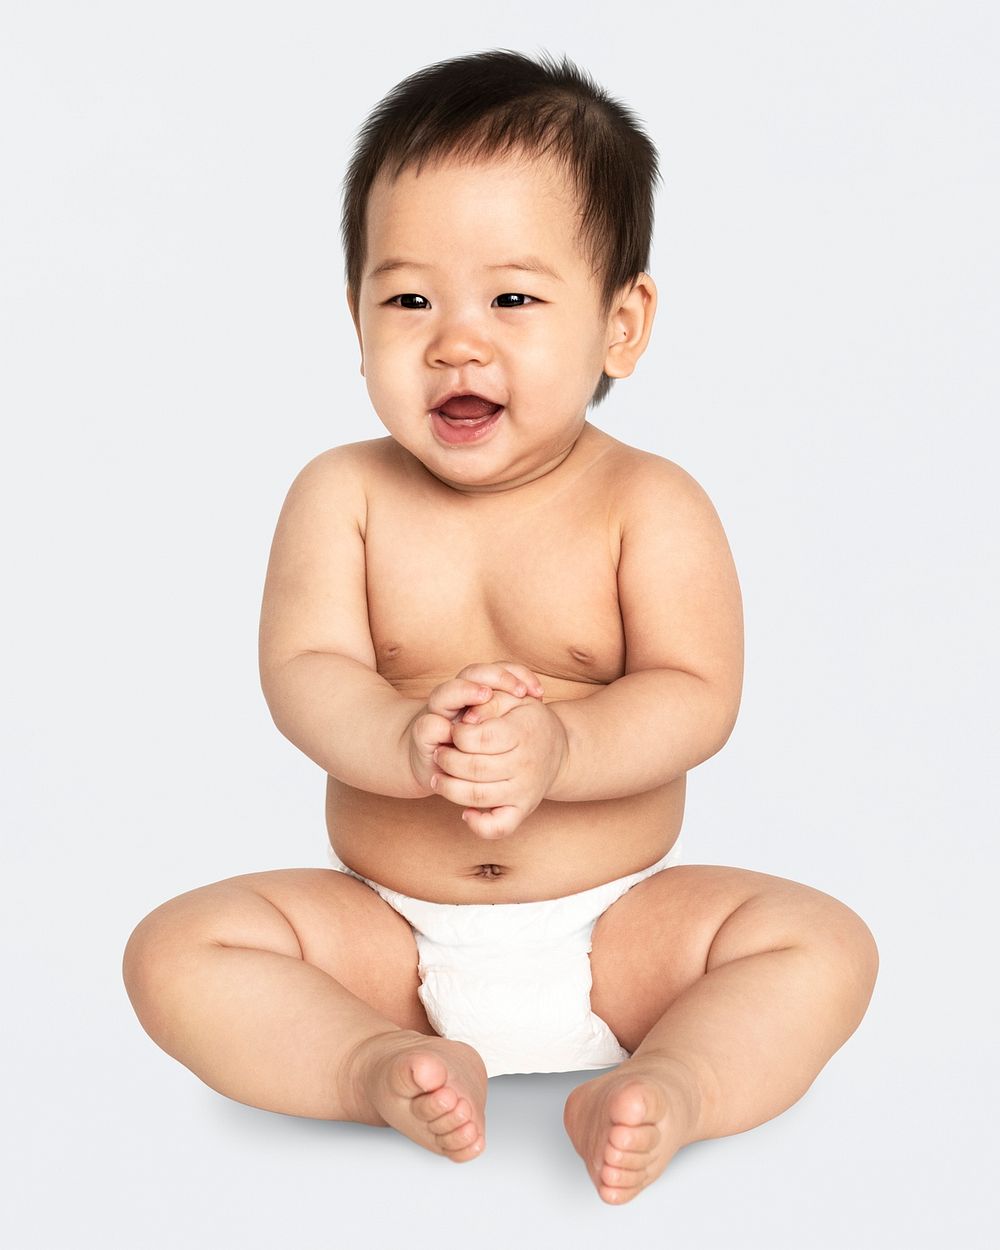 Cheerful baby in a studio